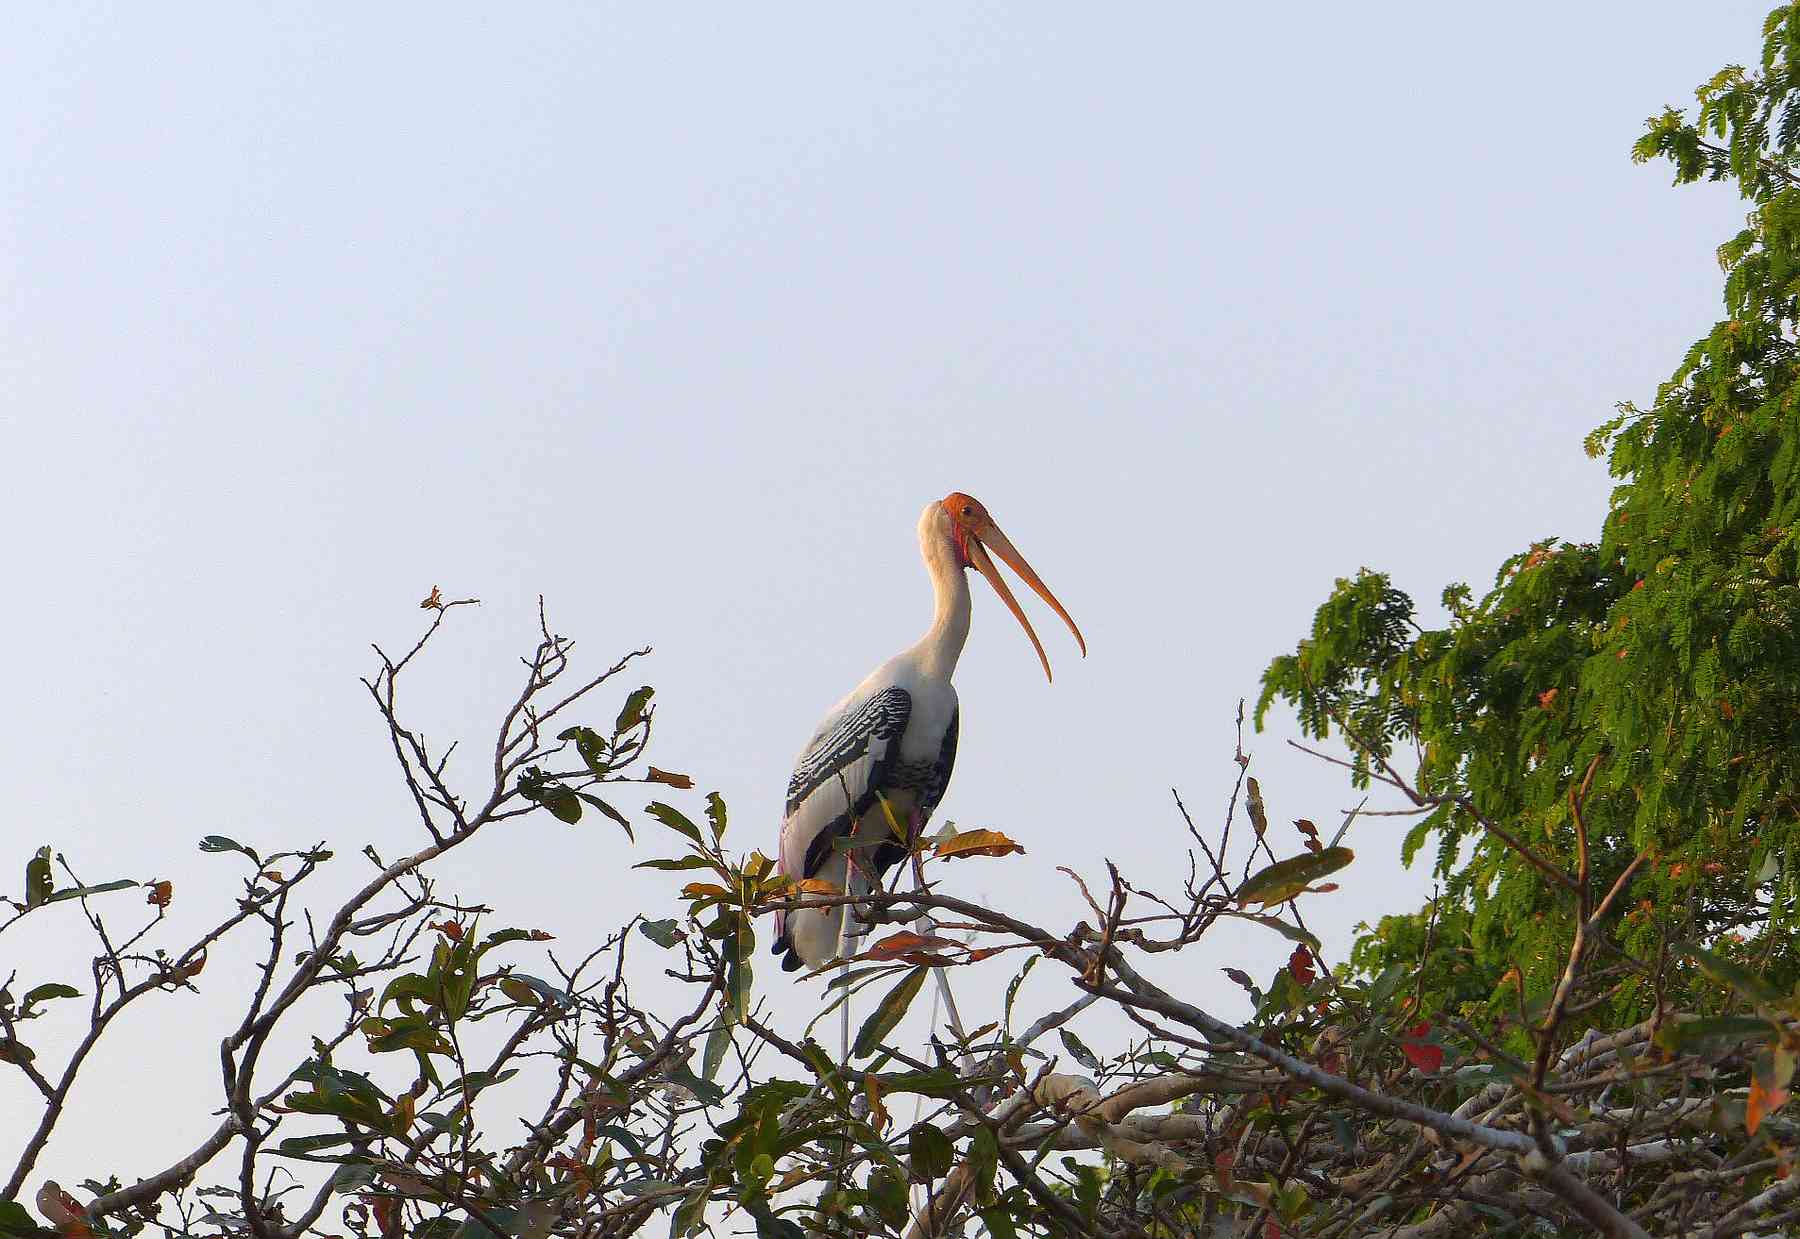 Painted Storks were also ready to nest